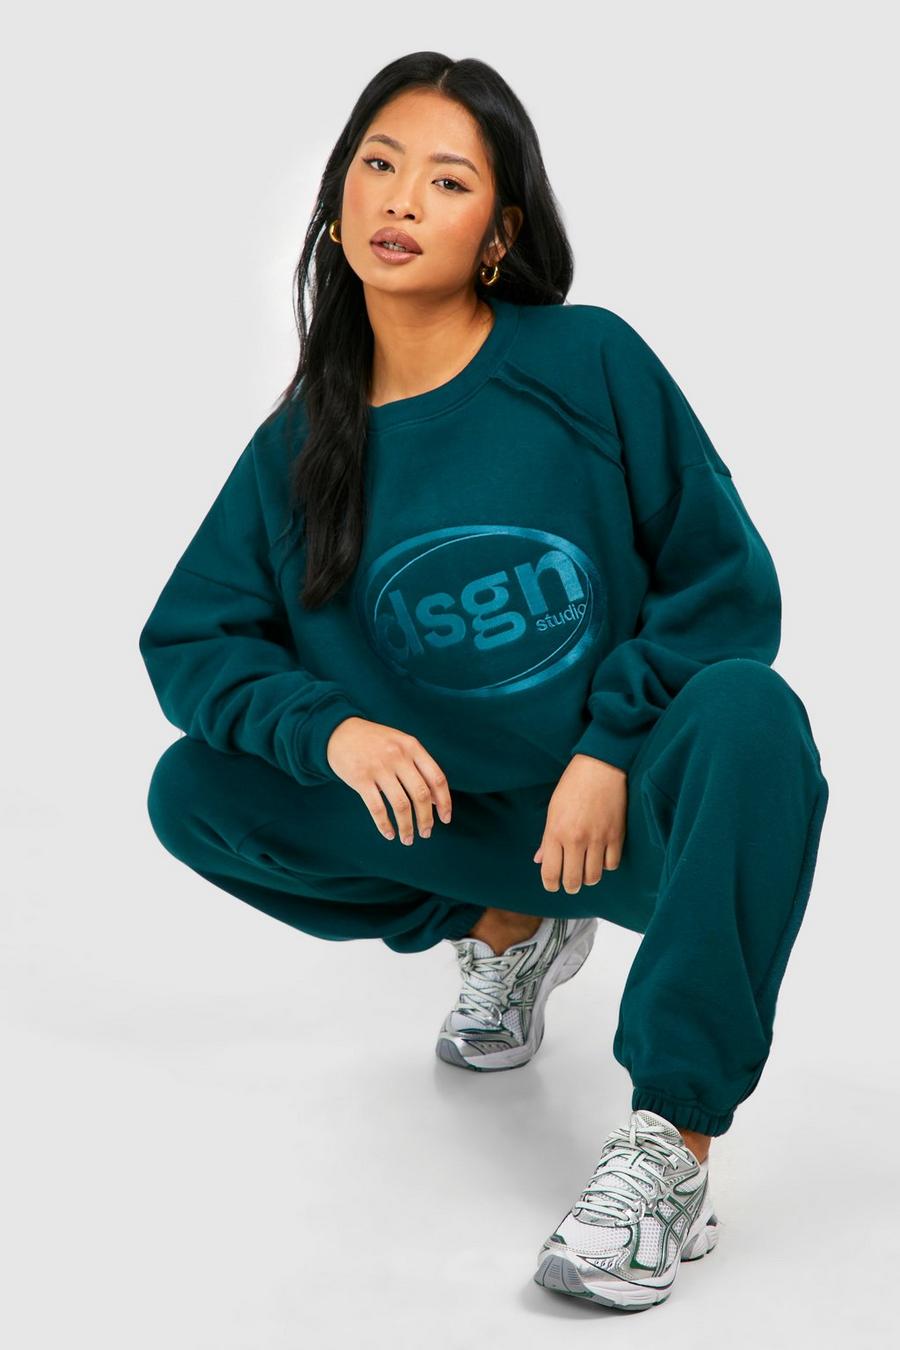 Teal Petite Exposed Seam Dsgn Embroidered Tracksuit